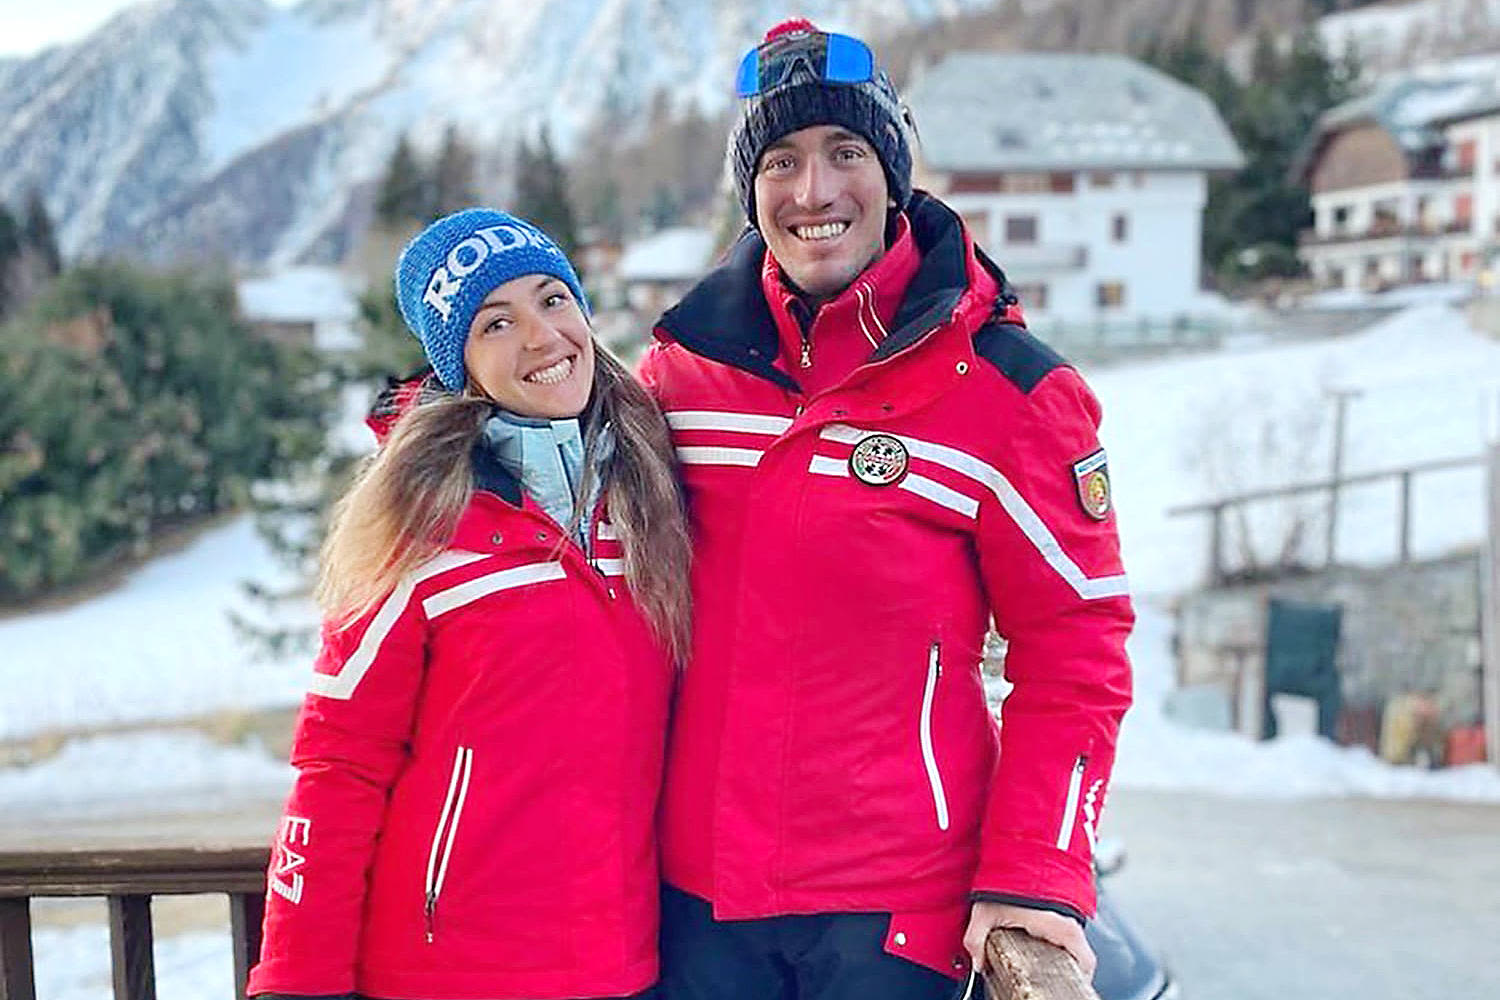 World Cup skier and girlfriend fall to their deaths on an Italian mountain